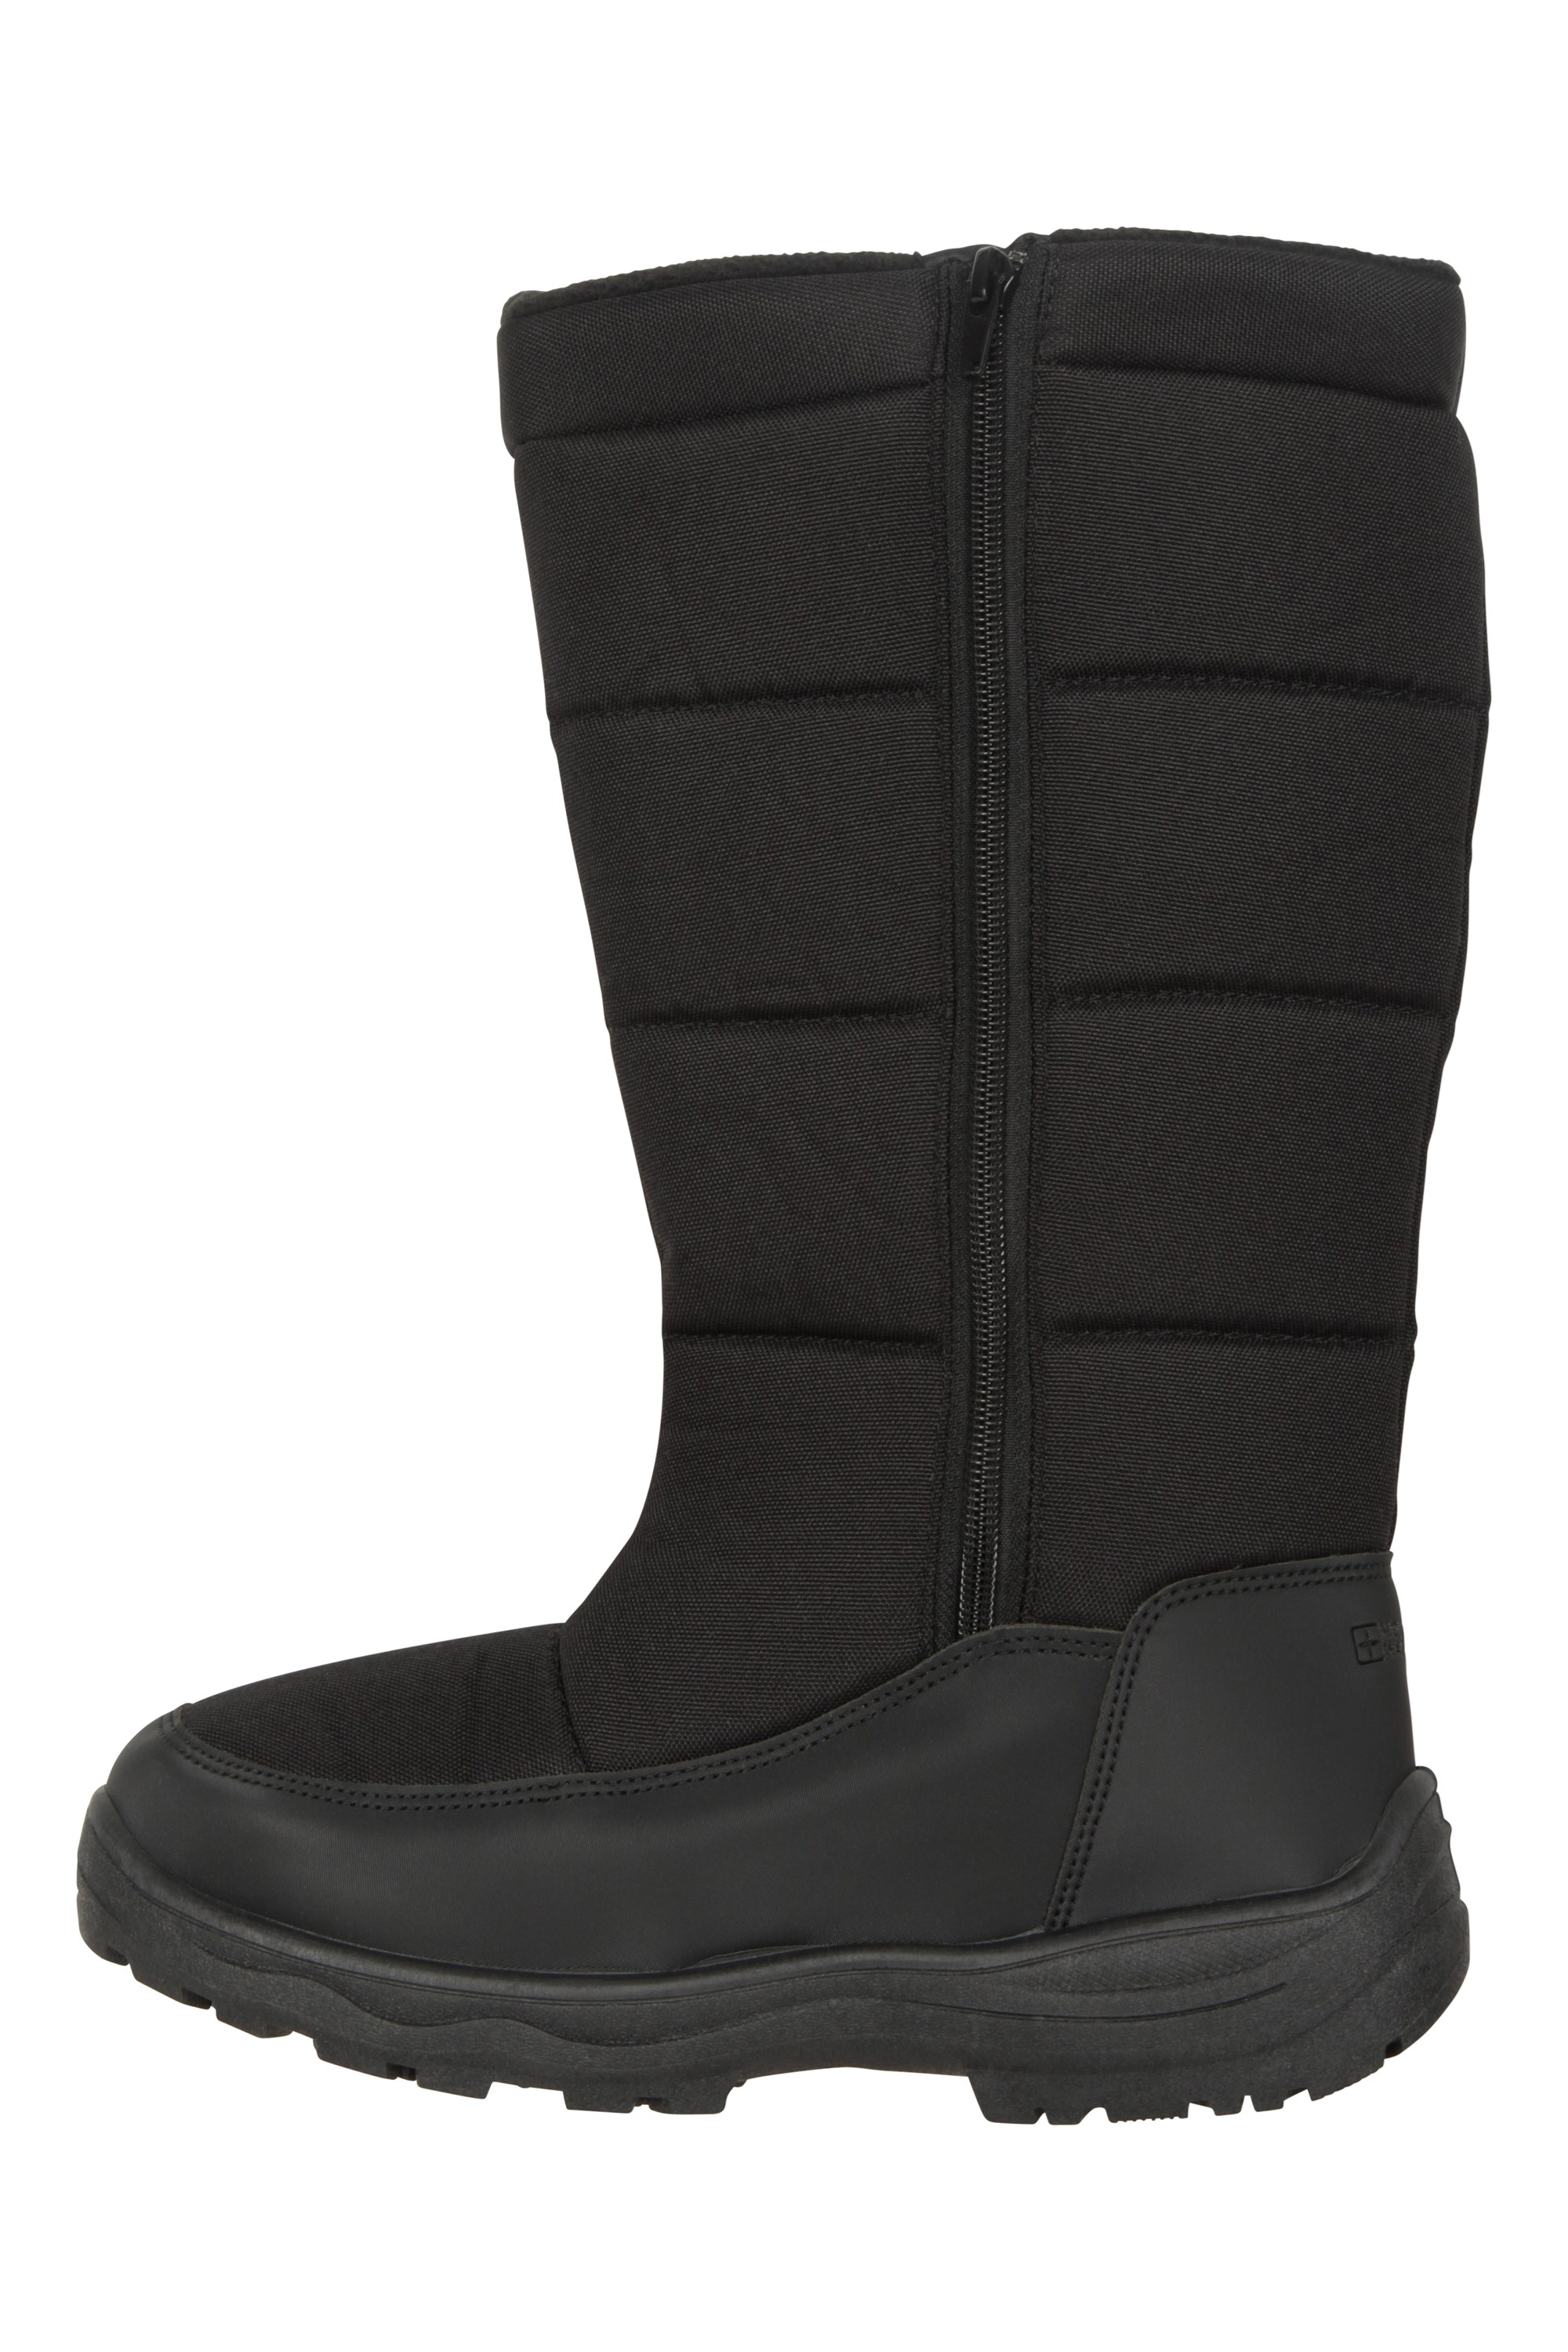 Snowflake Extreme Womens Adaptive Long Snow Boots